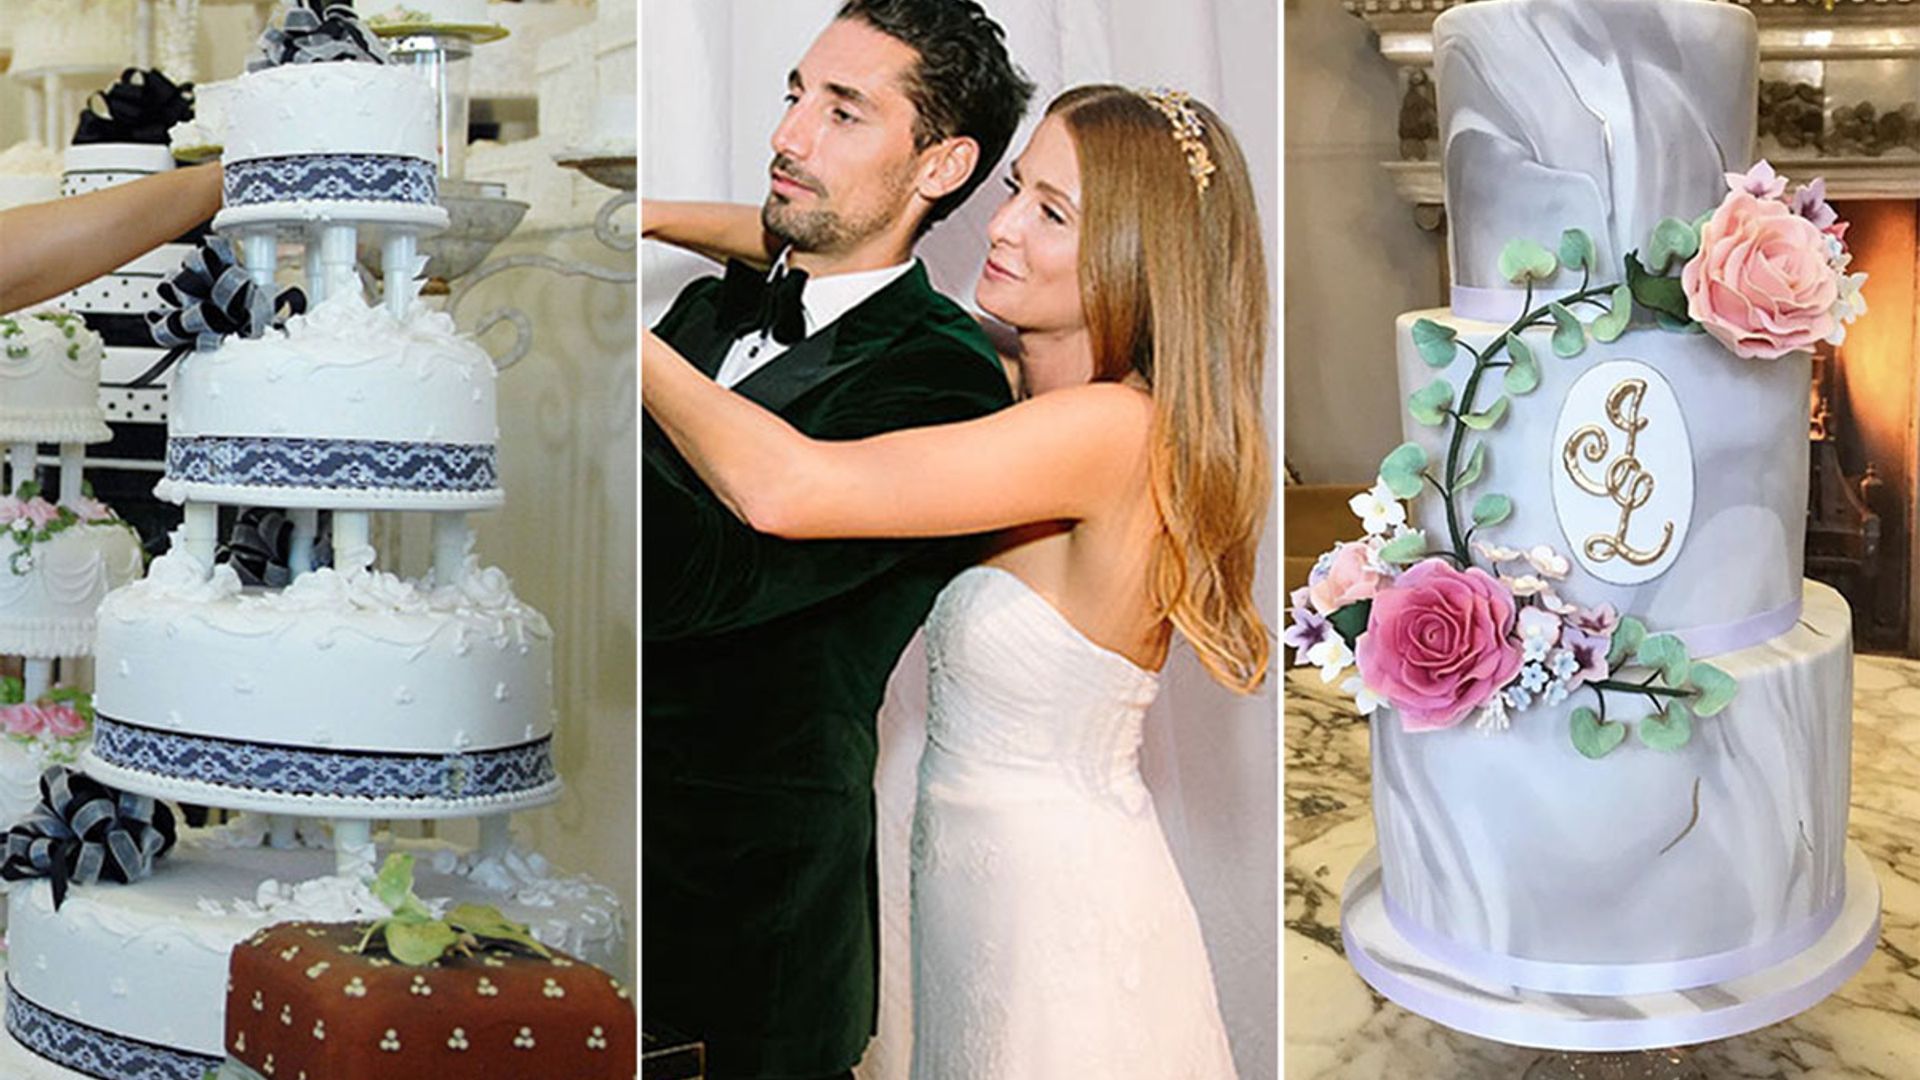 25 Over-the-Top Wedding Cakes We Can't Get Enough Of